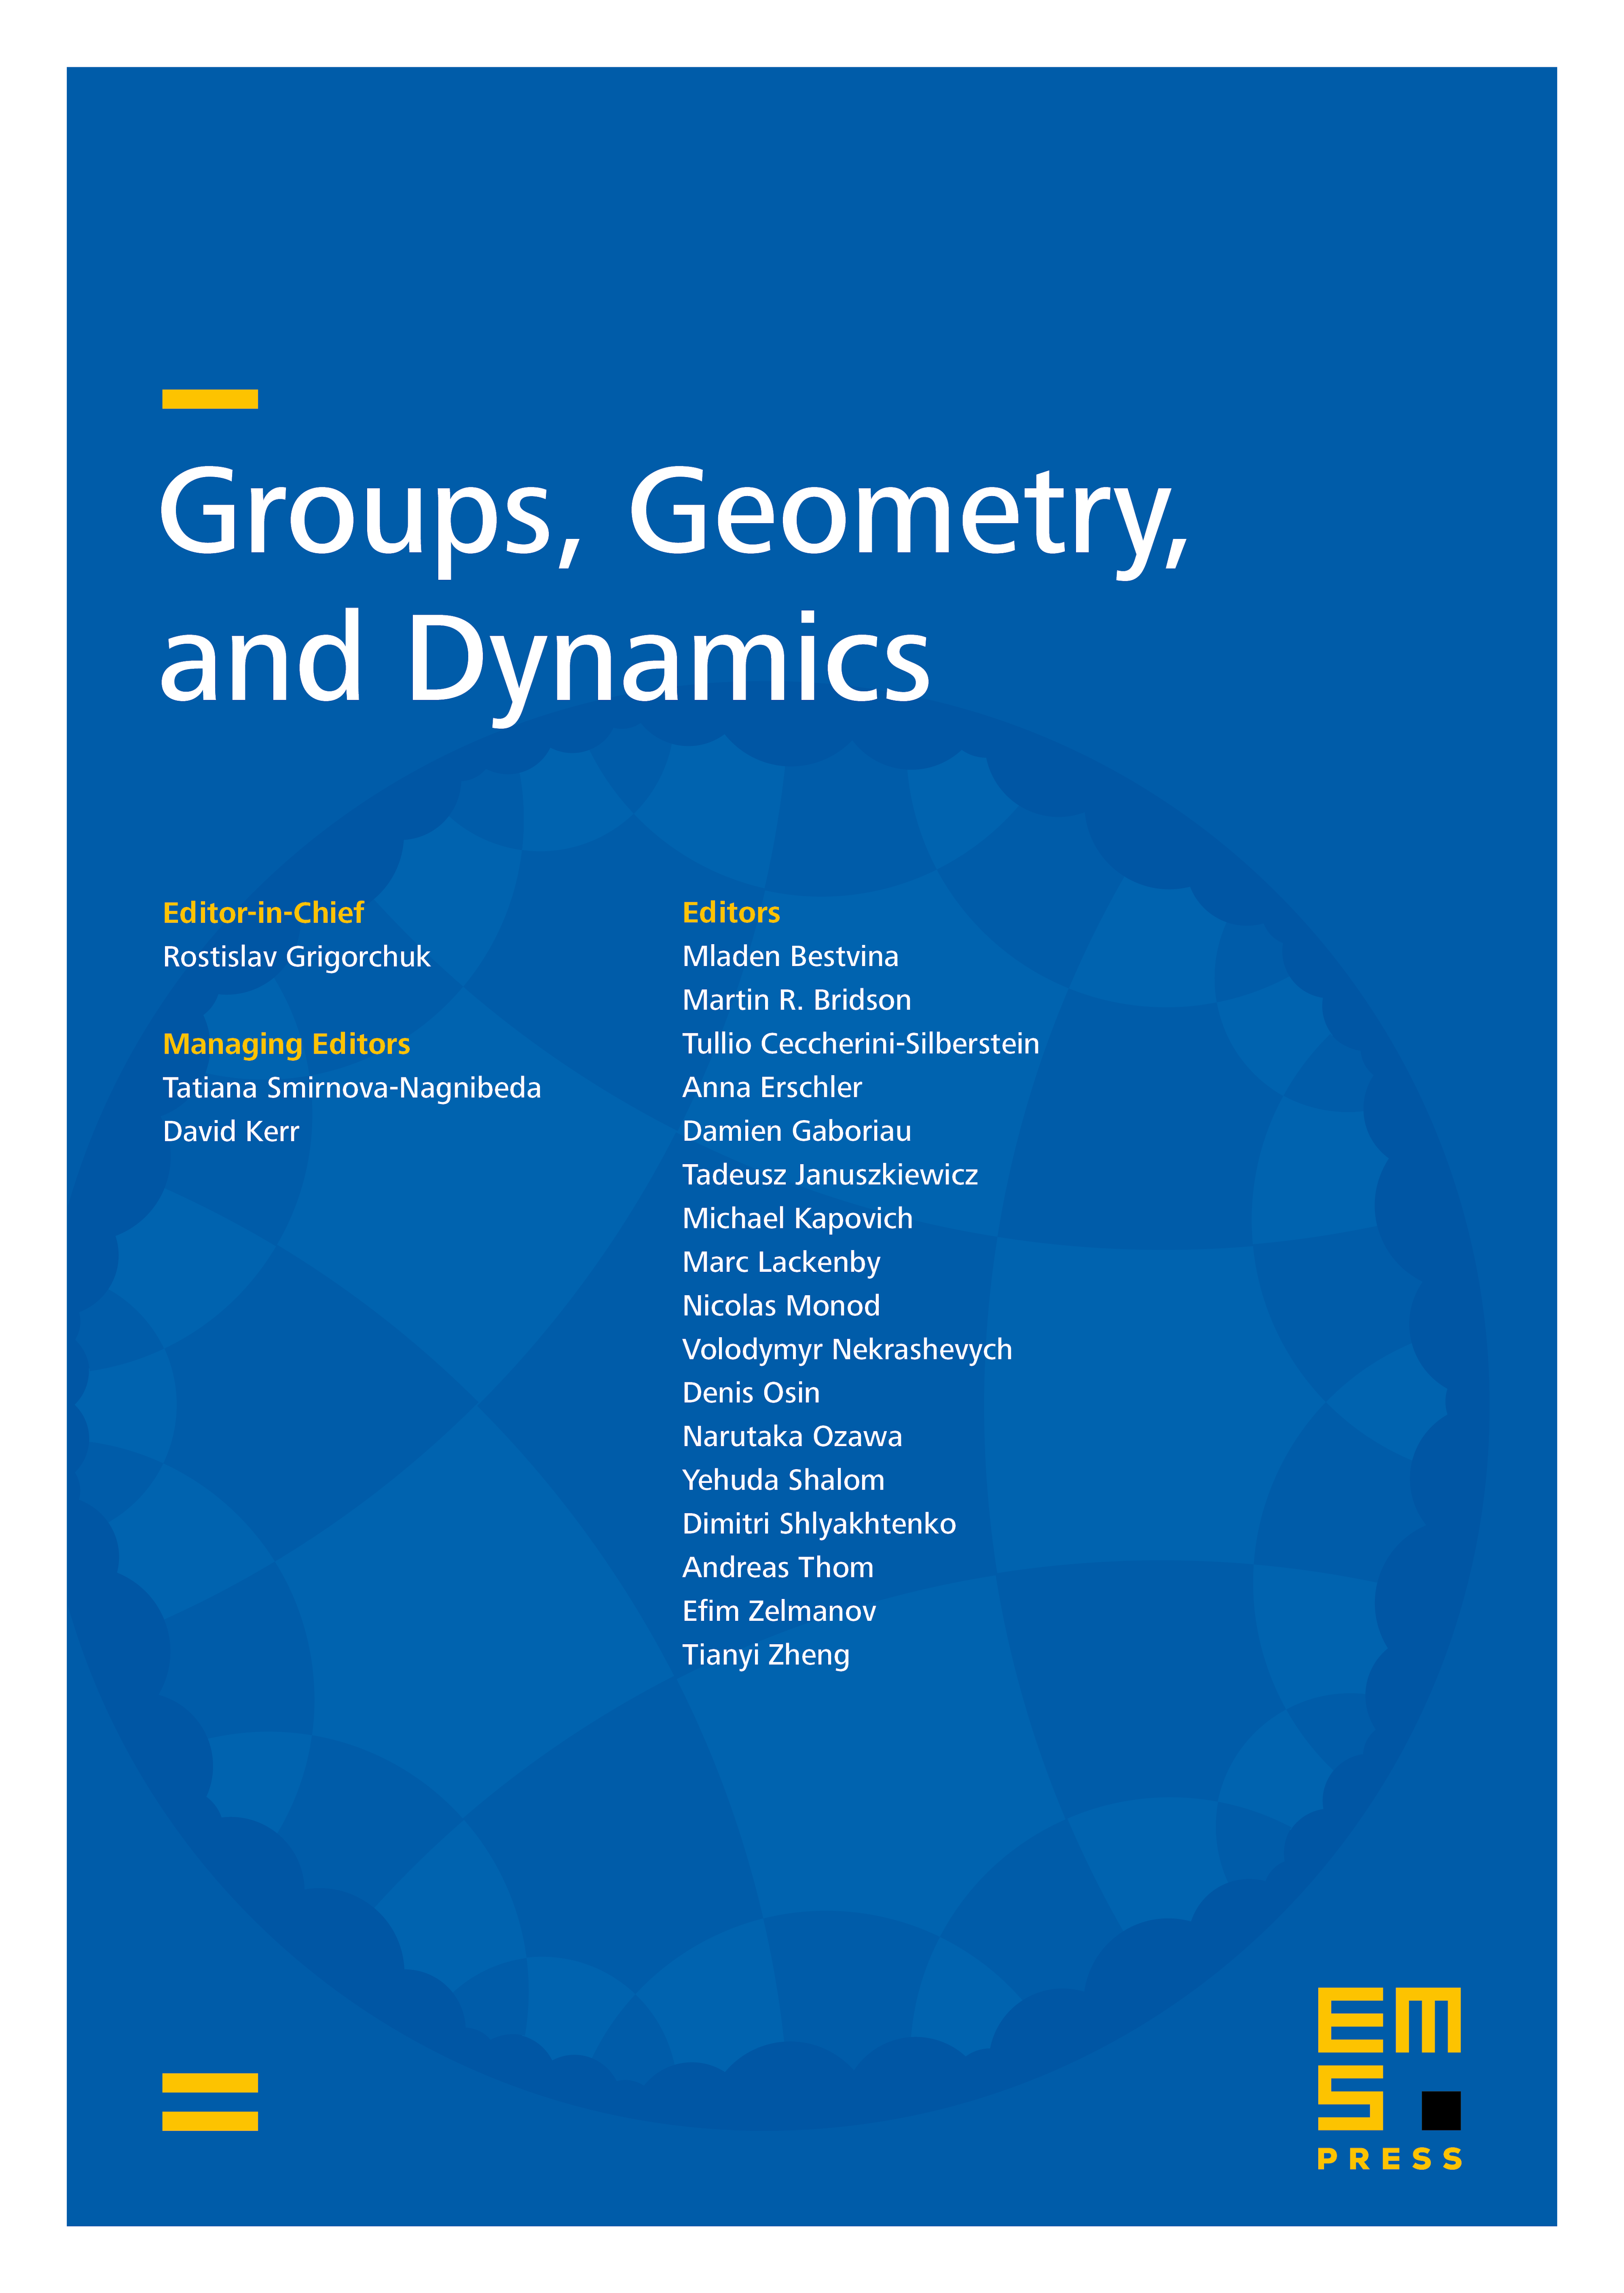 Group boundaries for semidirect products with $\mathbb{Z}$ cover